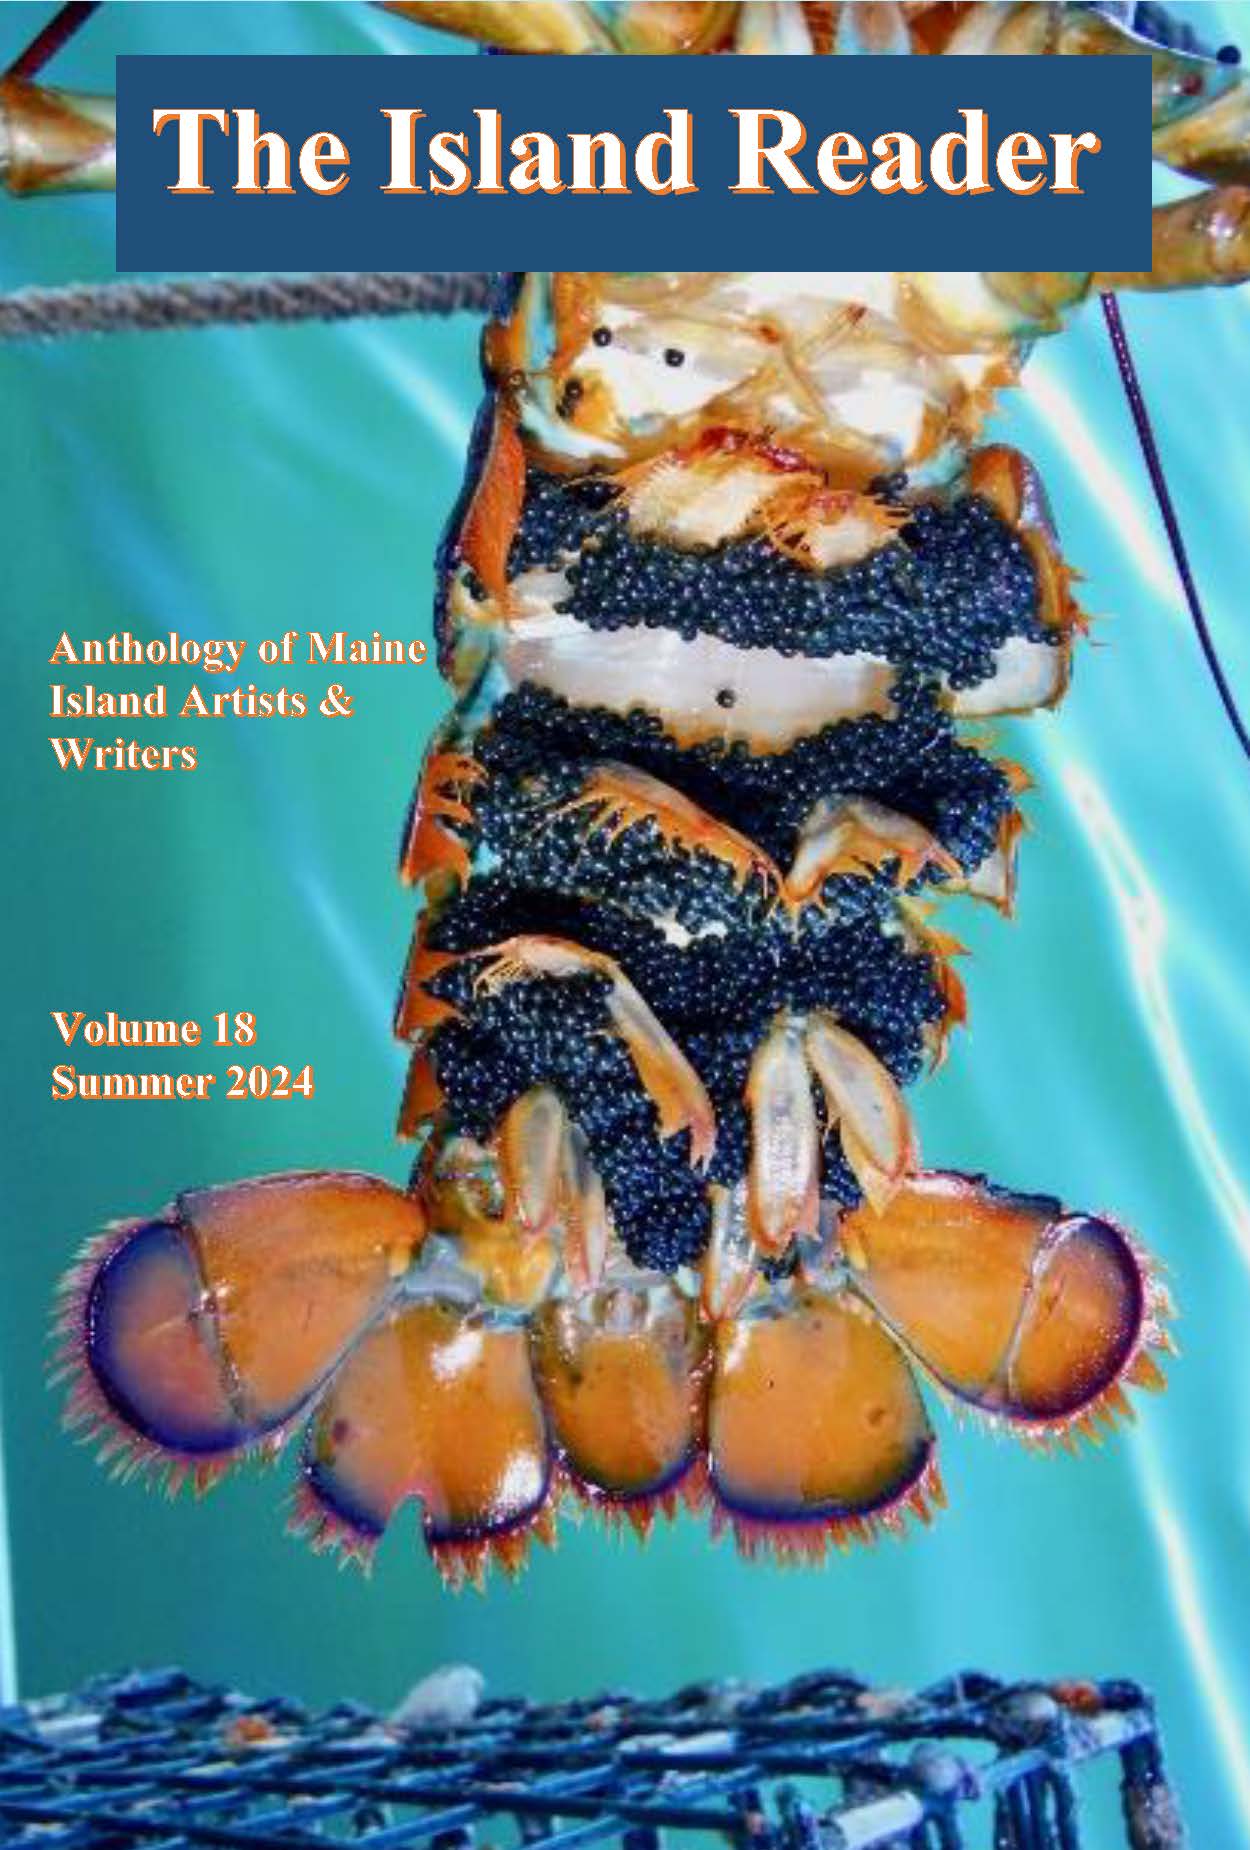 Illustrated cover of a lobster tail surrounded by water.